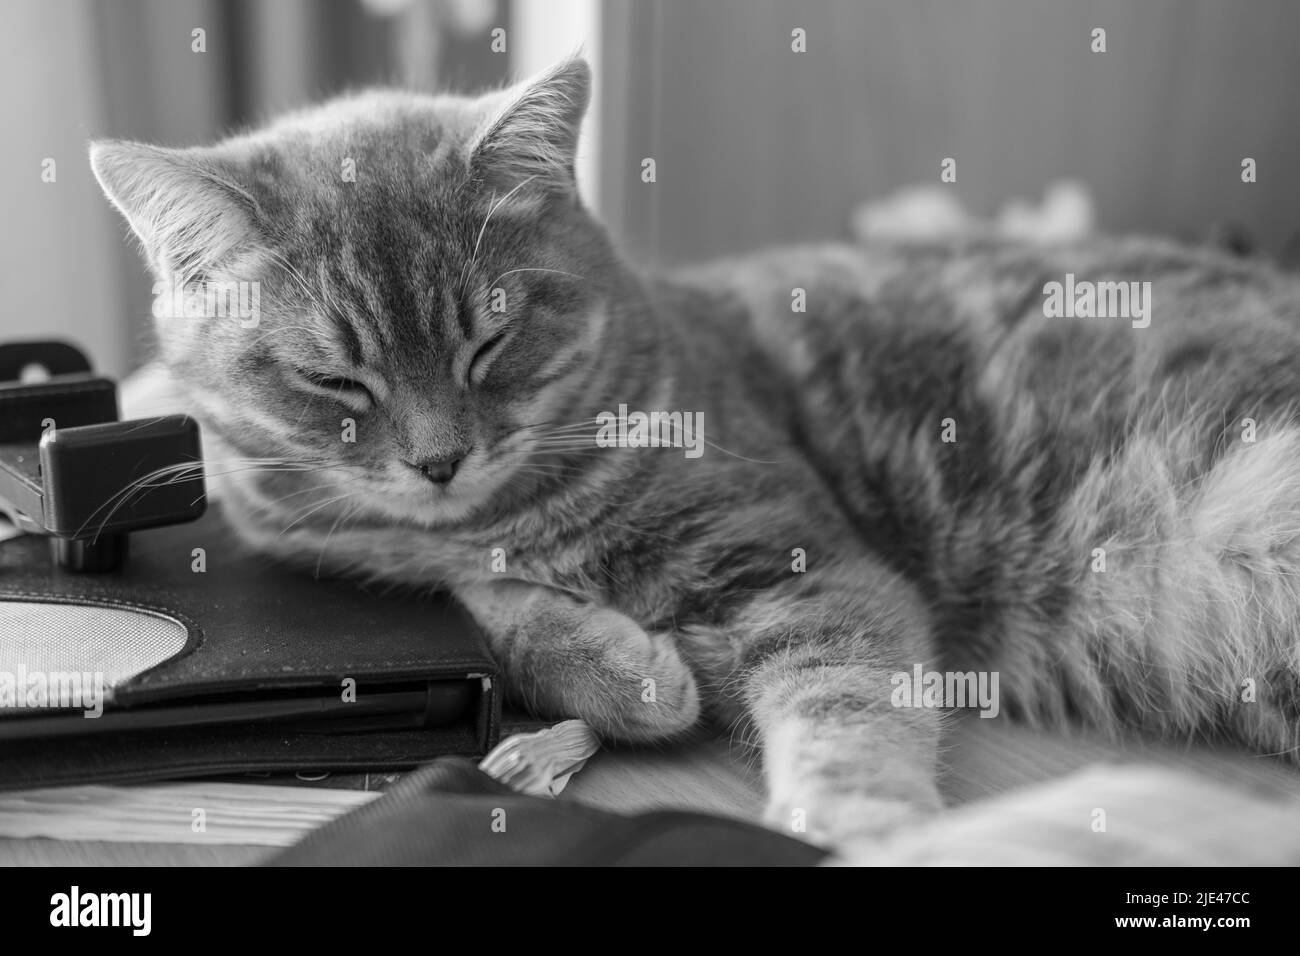 Funny little gray fold Scottish kitten sleeps on a desk, black and white. Cute sleeping tabby kitten with closed eyes. Pet Care Stock Photo